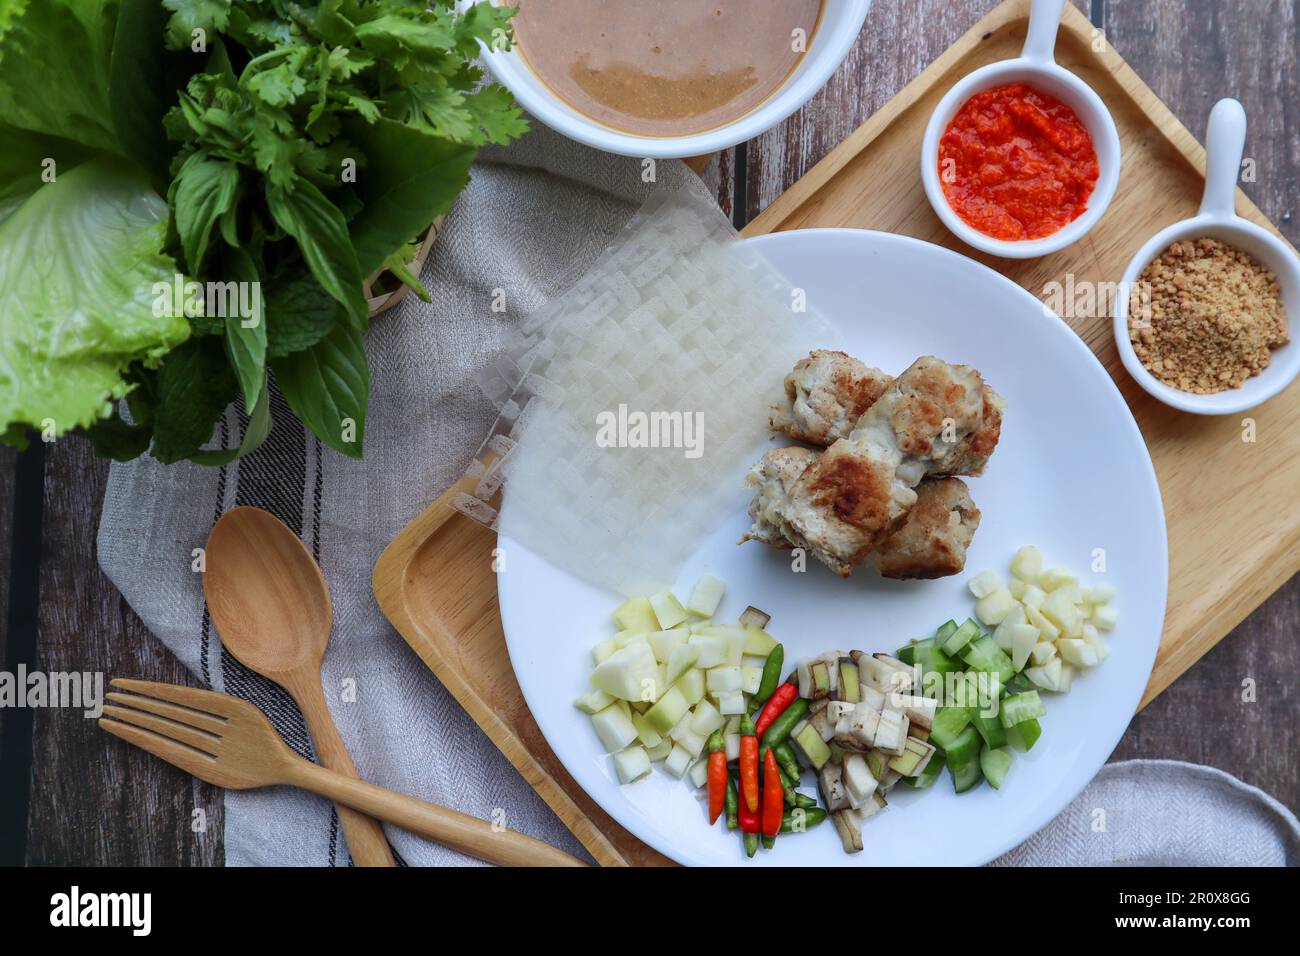 Nem Nuong - Vietnamese food of grilled pork sausage eat with rice paper and vegetables Stock Photo